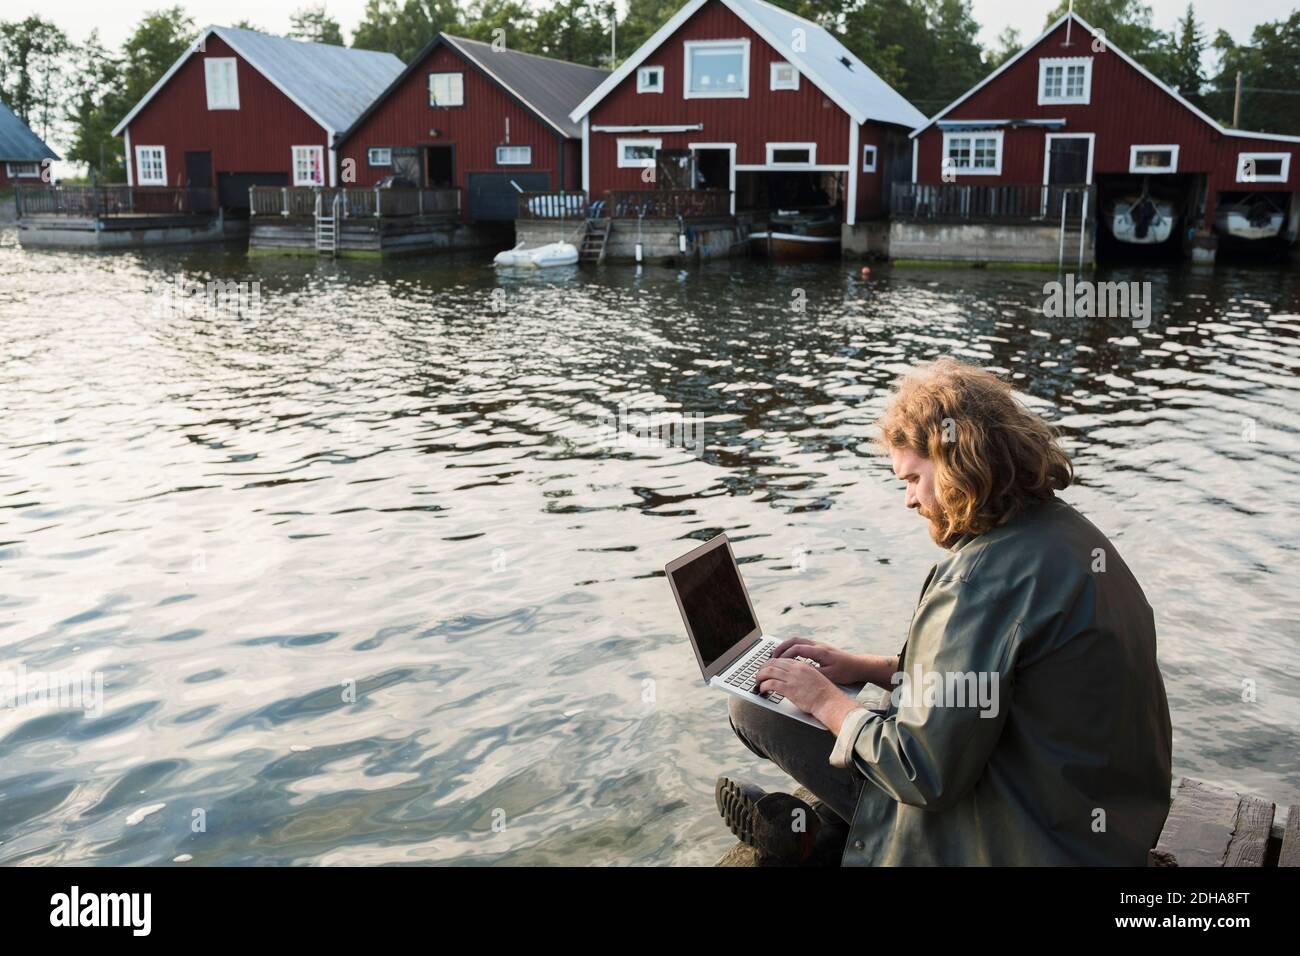 Man using laptop while sitting on jetty by lake against holiday villas Stock Photo